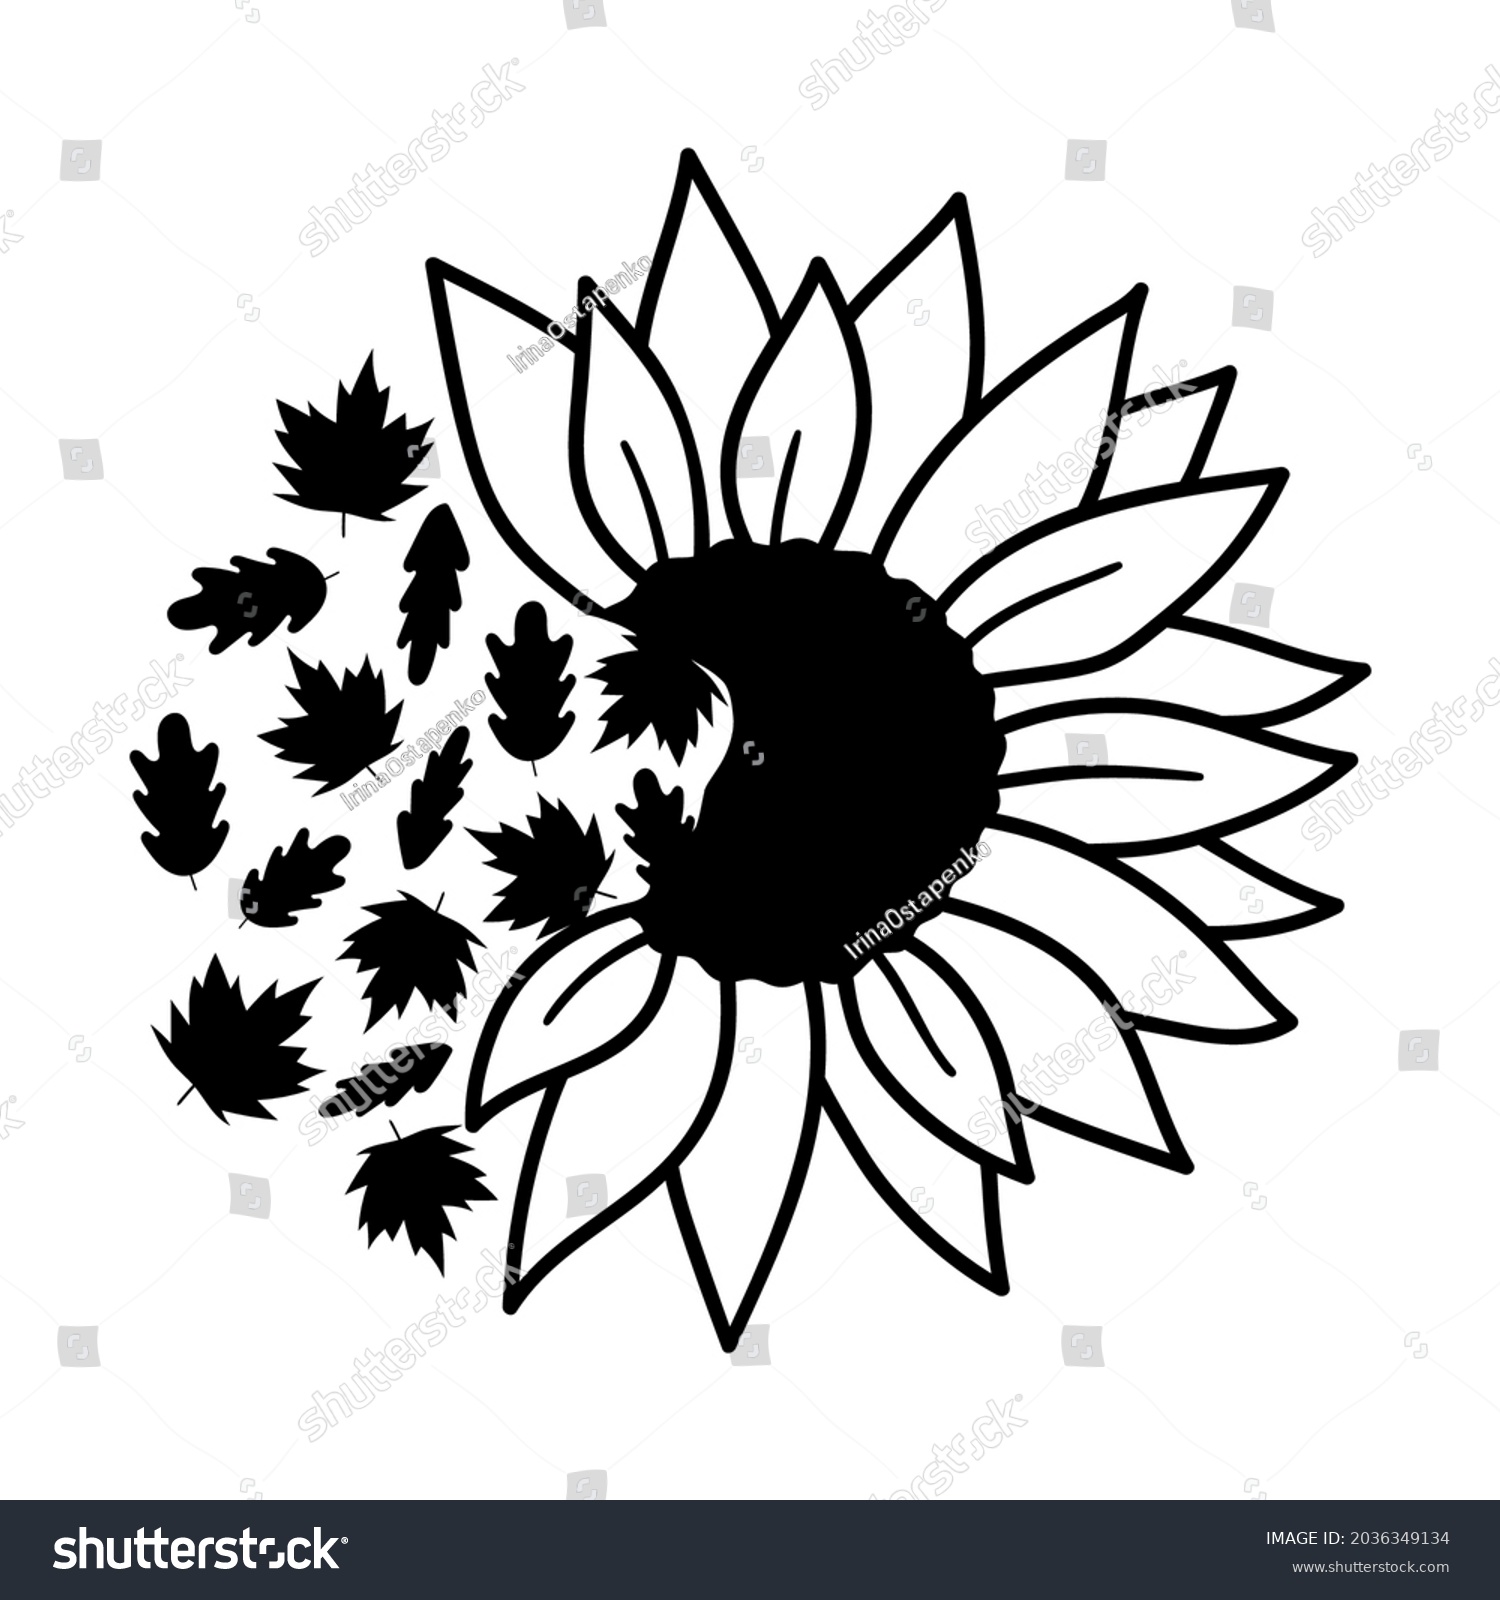 SVG of Half of sunflower. Fall leaves. Vector autumn illustration.  Isolated on white background. Good for posters, t shirts, postcards. svg